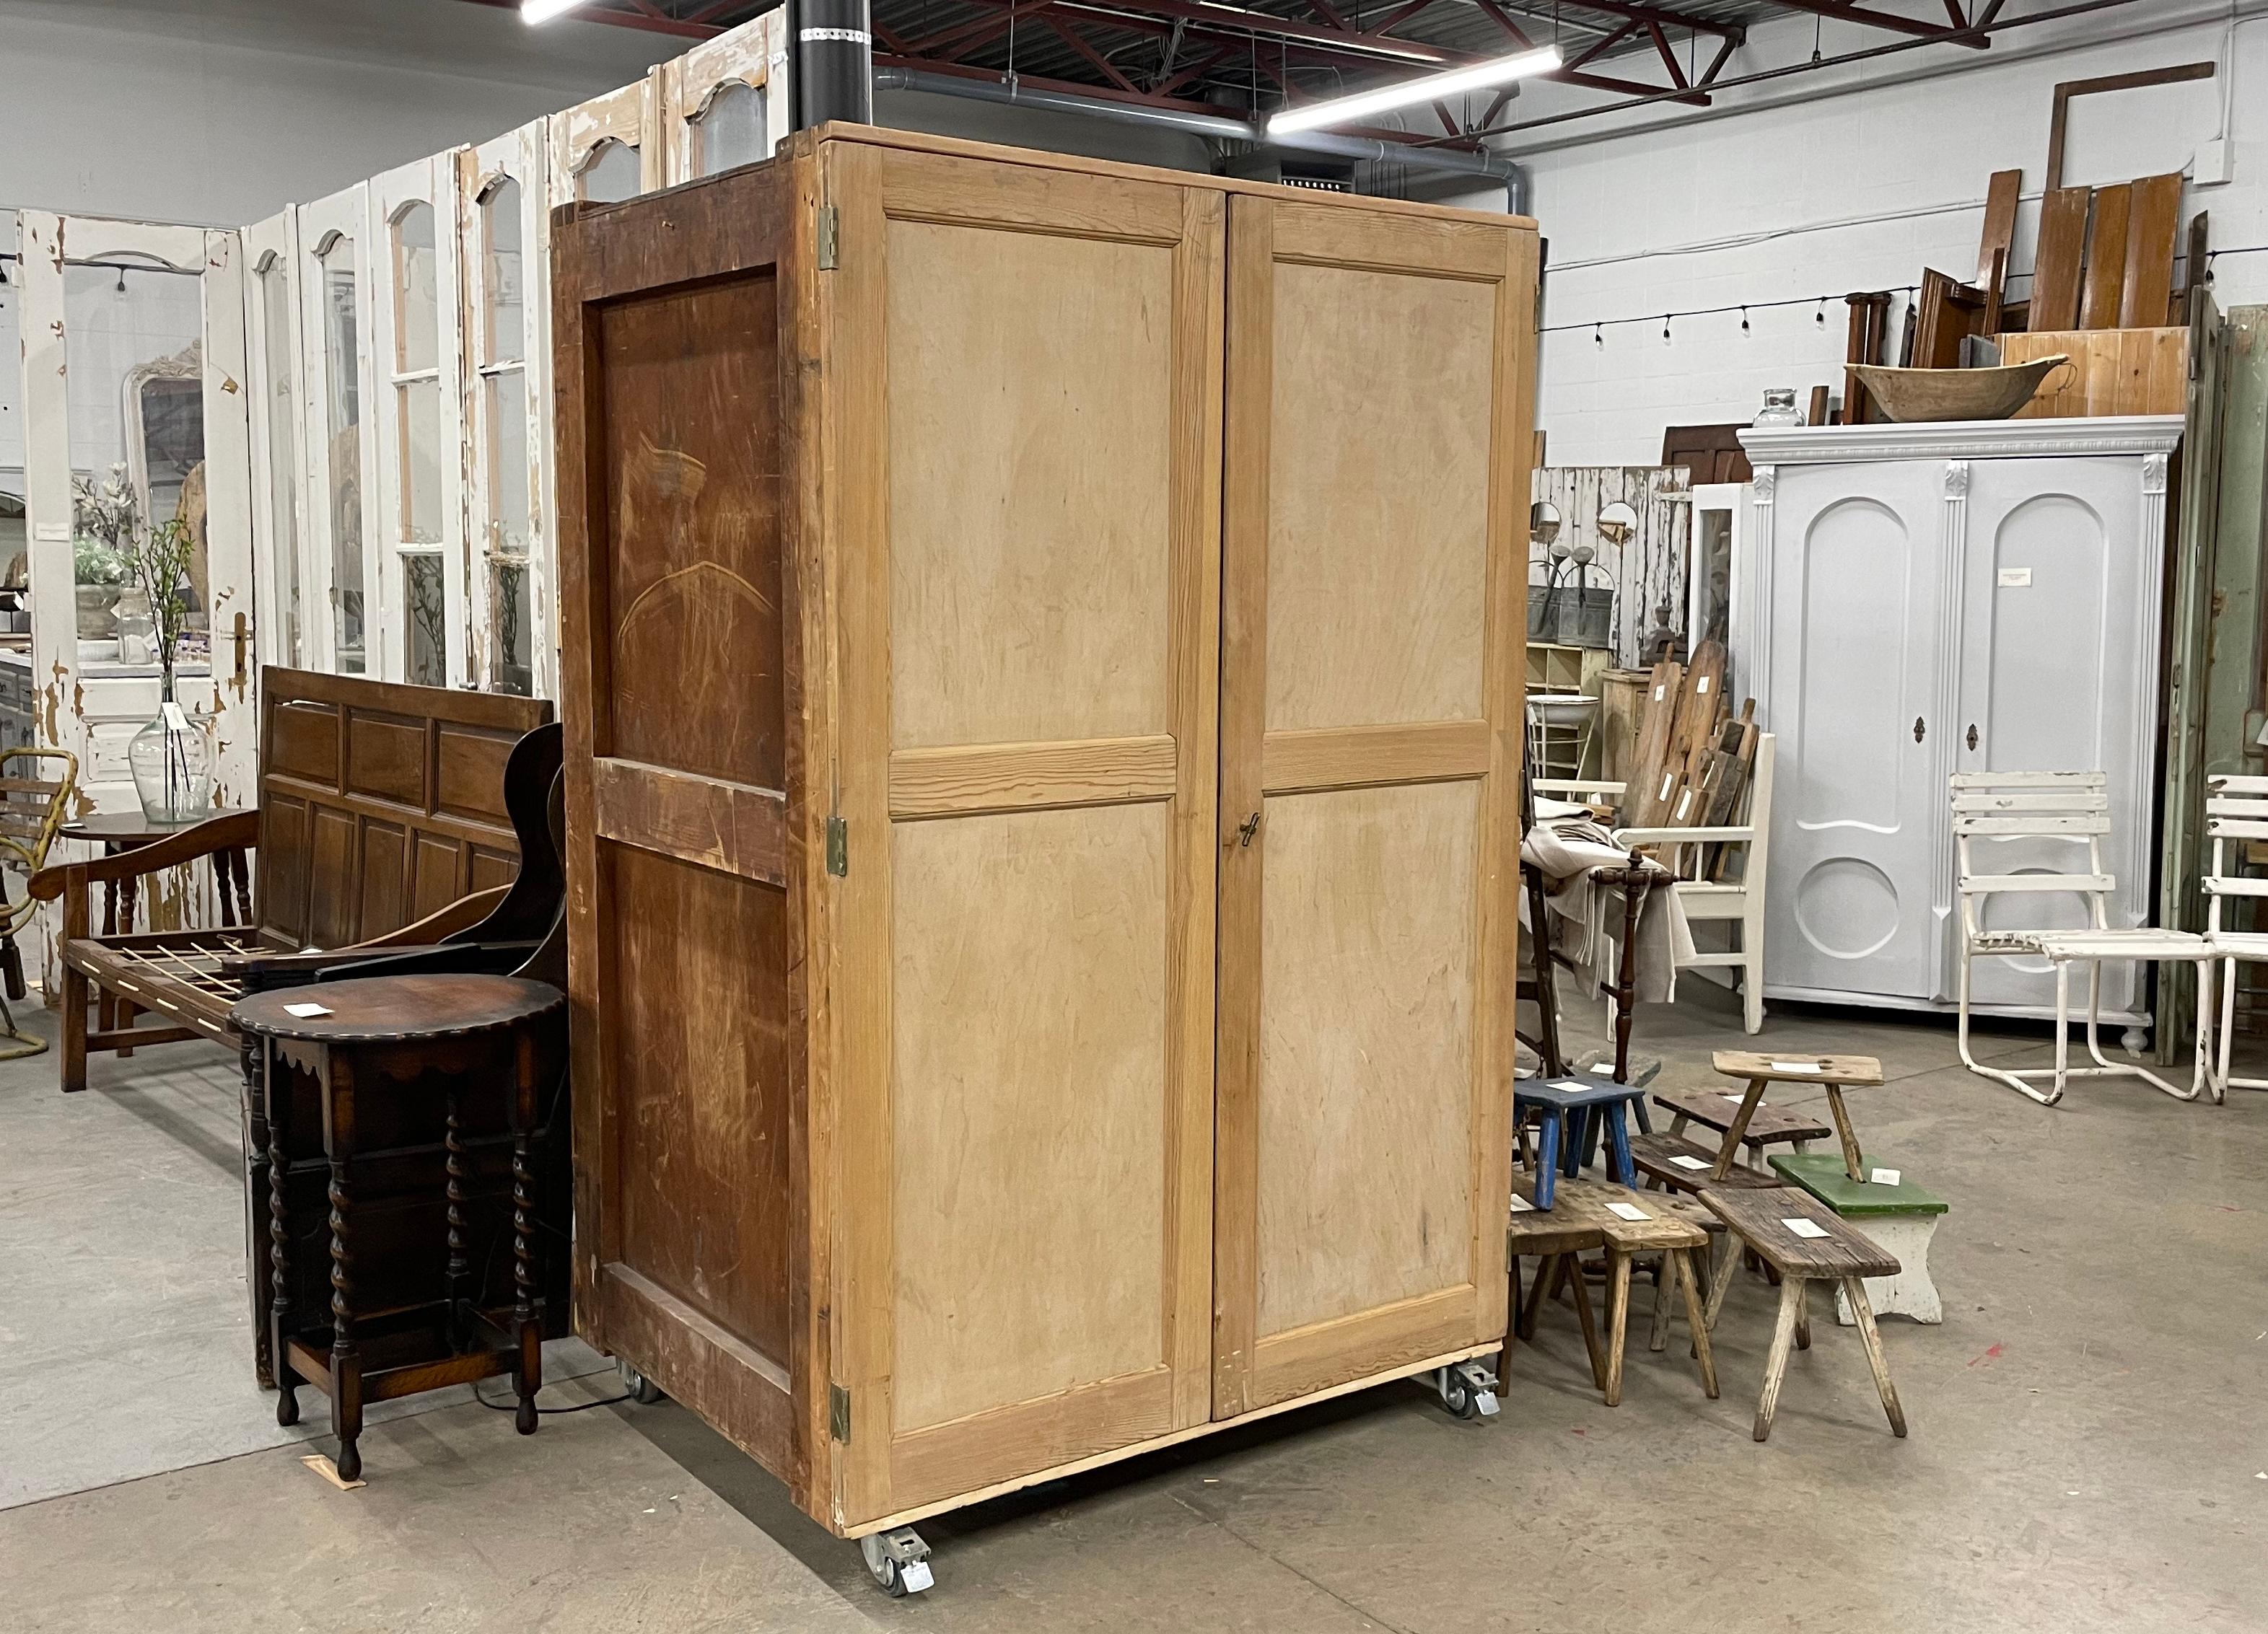 Substantial vintage wooden specimen cupboard on caster wheels, salvaged from the Natural History Museum, London, during its refurbishment between 2009-2012.

The frame of the cupboard is constructed with mortise and tenon joints. It has 12 large